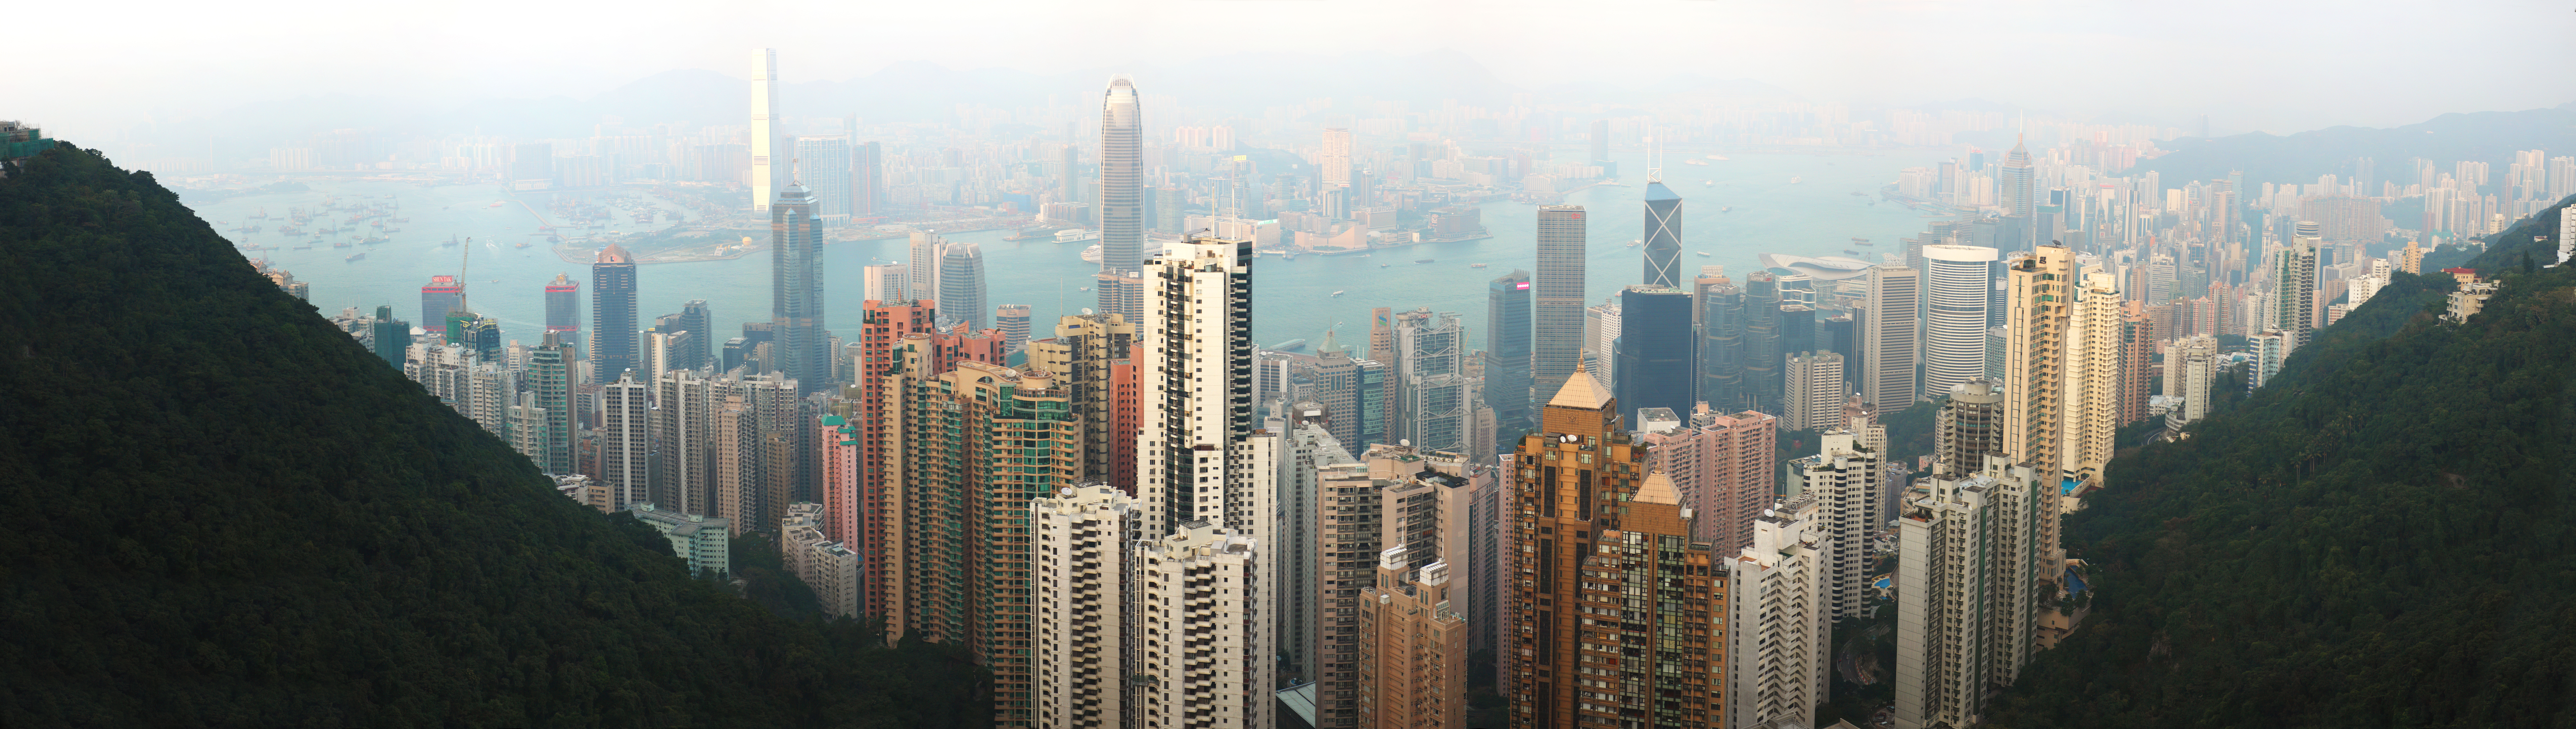 photo,material,free,landscape,picture,stock photo,Creative Commons,A skyscraper, Victoria peak, Mt. Taihei, Hong Kong Island, Nine dragons